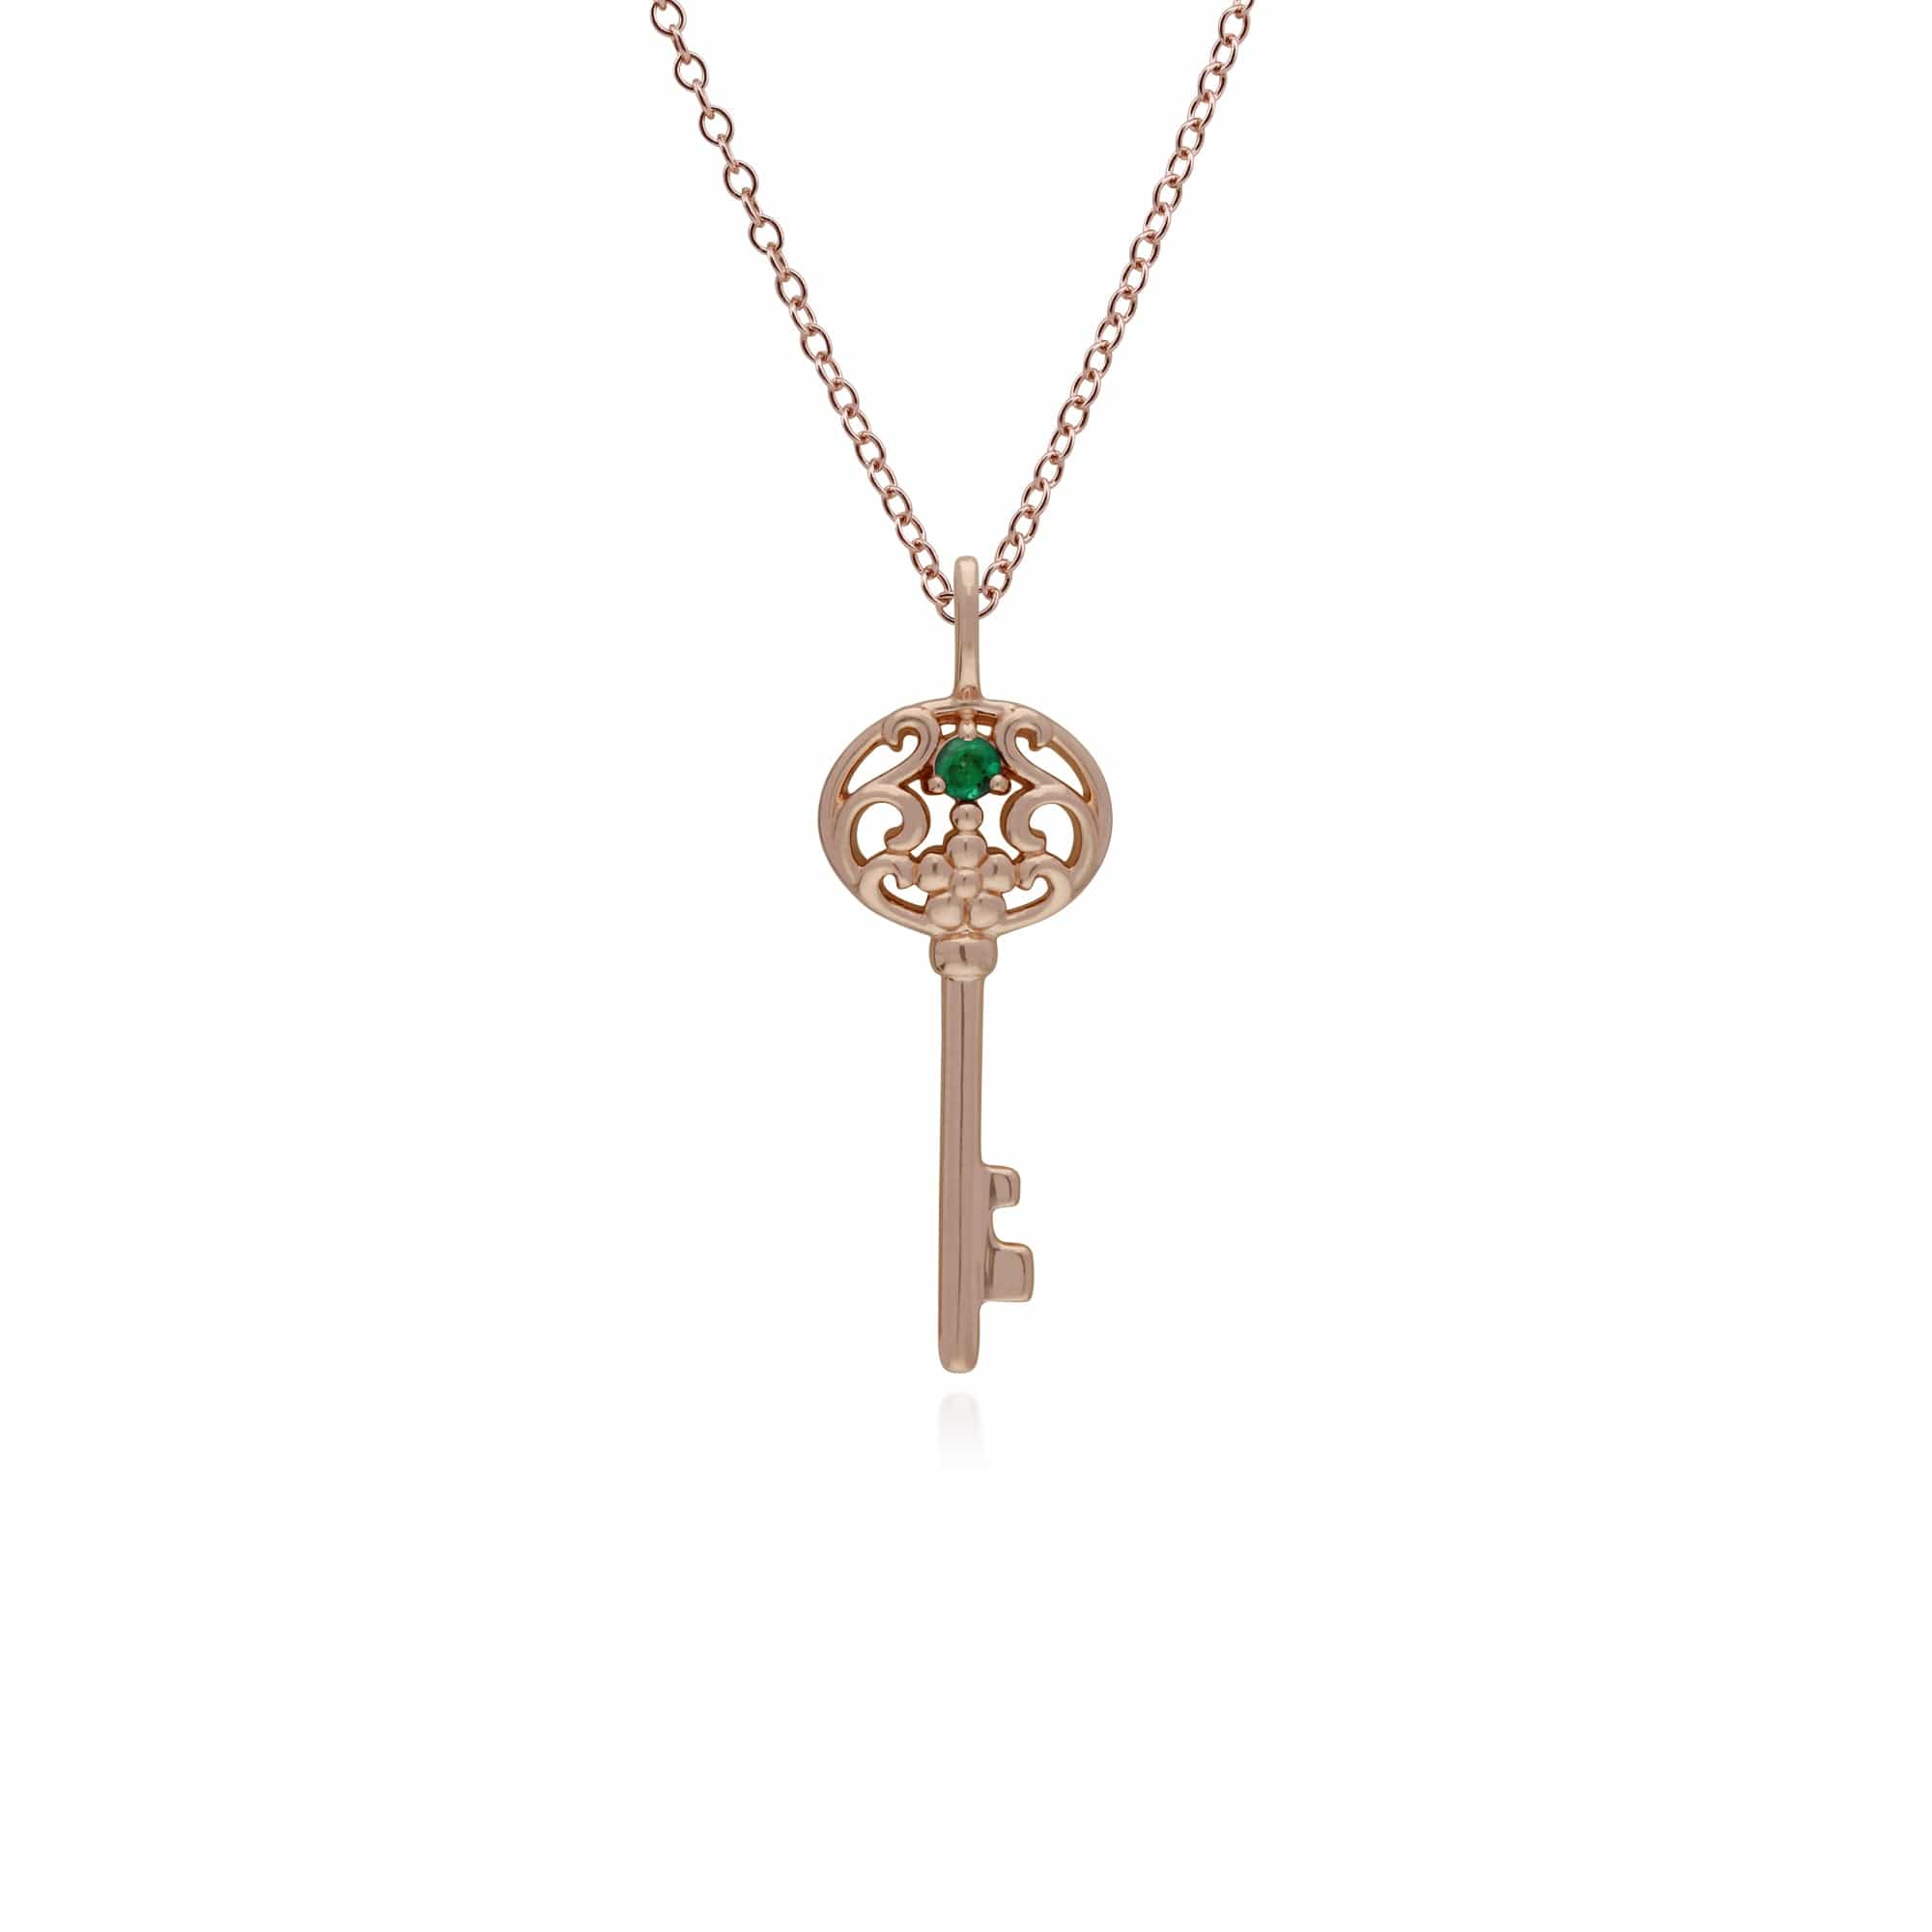 270P026704925-270P026501925 Classic Swirl Heart Lock Pendant & Emerald Big Key Charm in Rose Gold Plated 925 Sterling Silver 2